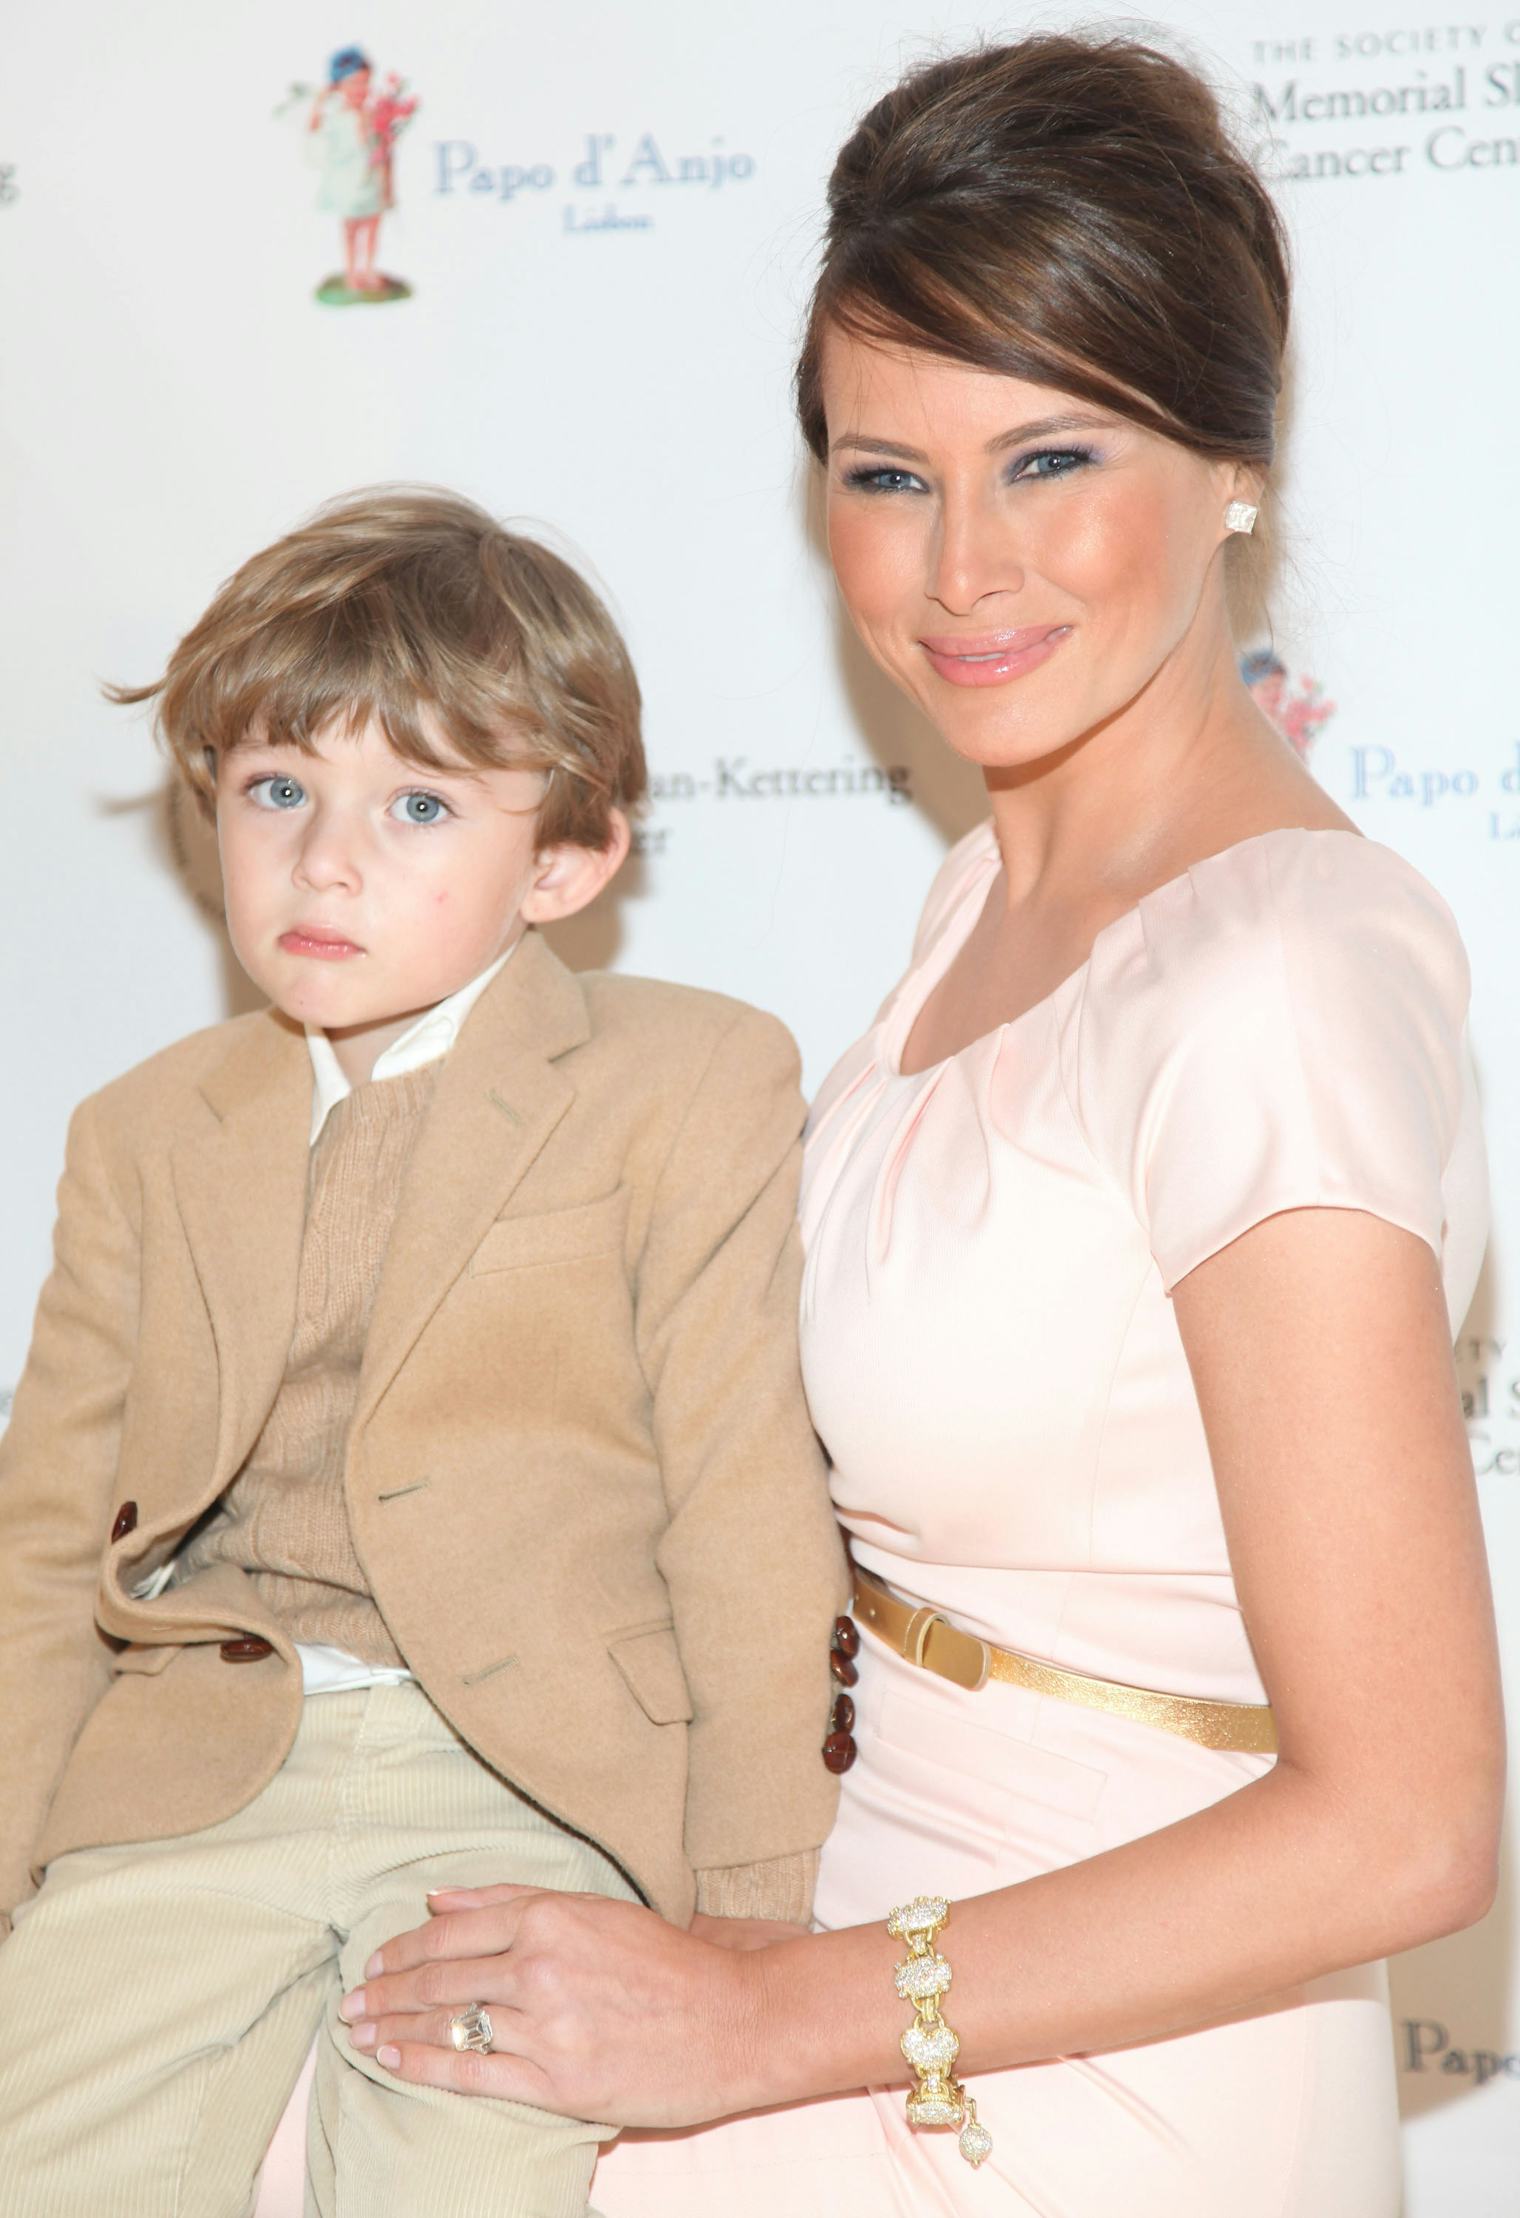 What Is Barron Trump's Net Worth? His Allowance Doesn't Appear To Be